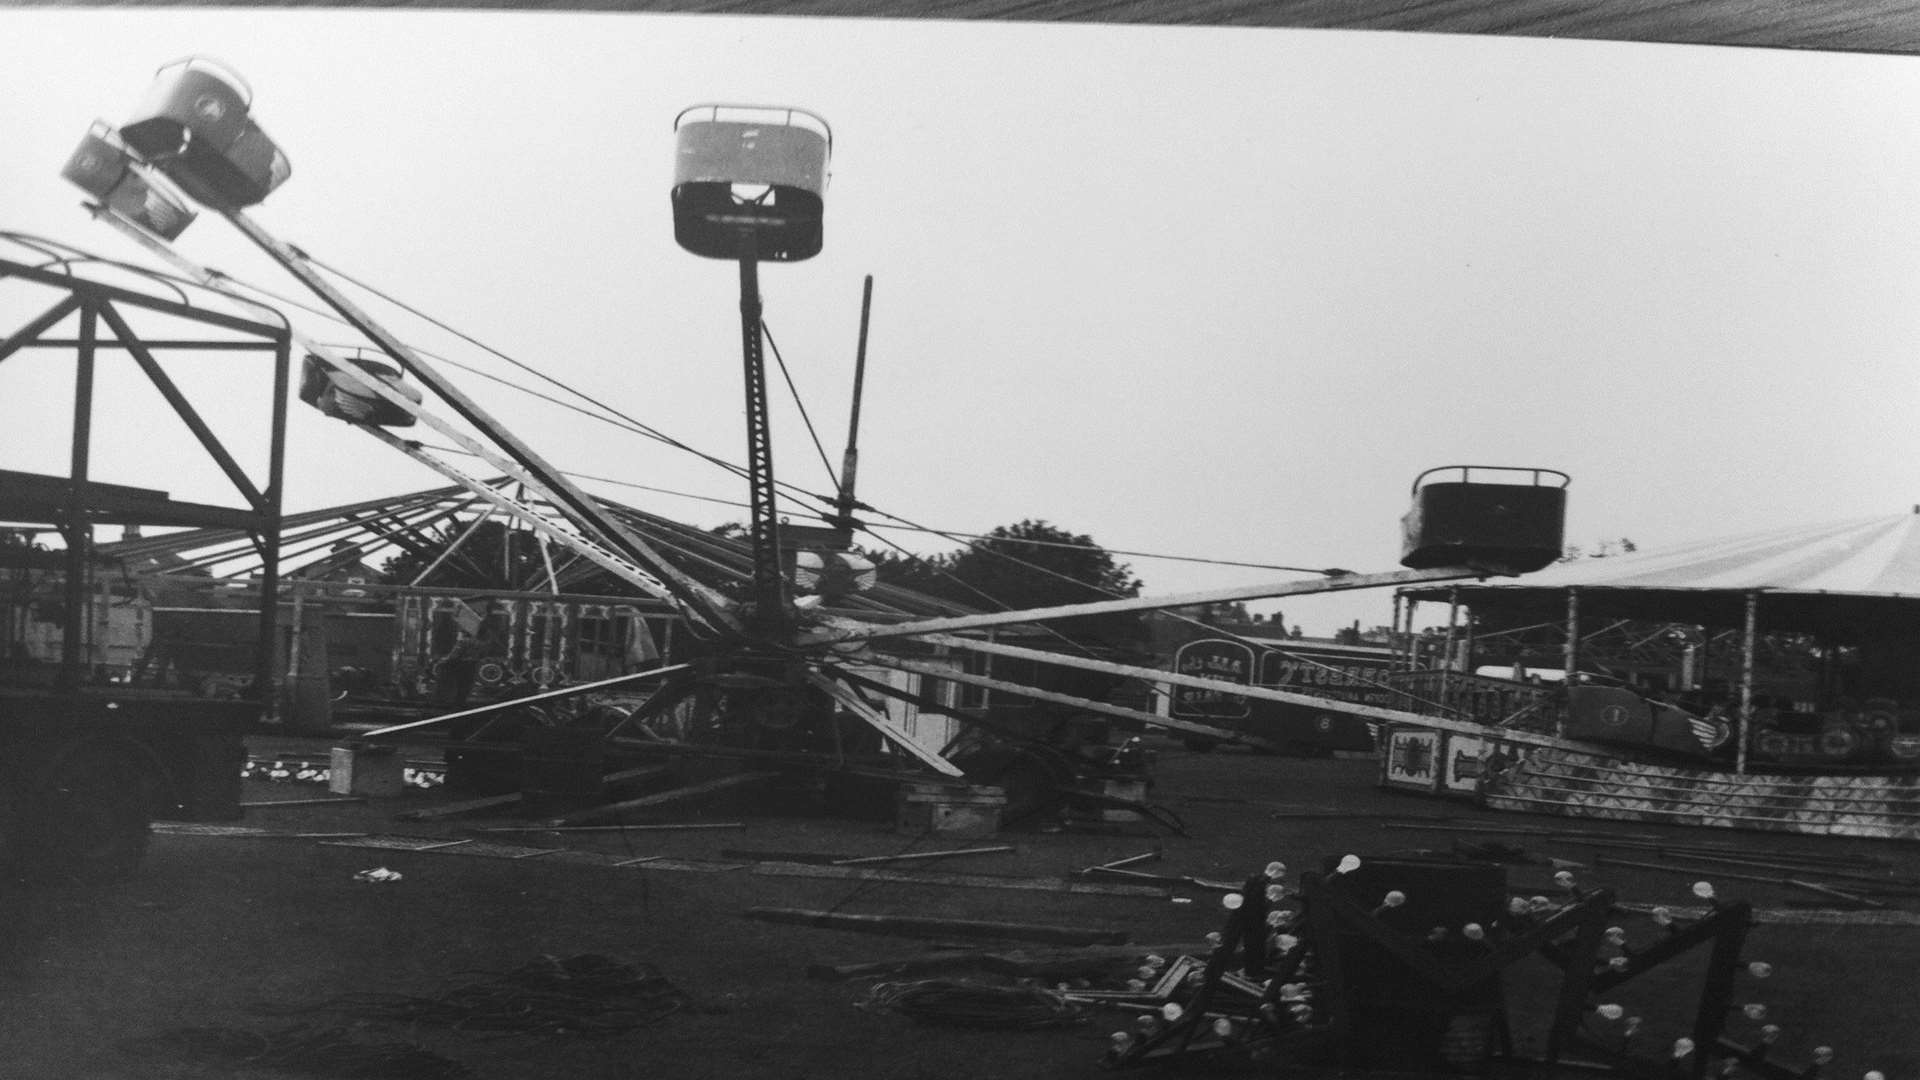 The fair has been coming to Deal for 70 years. Picture: Judith Gaunt